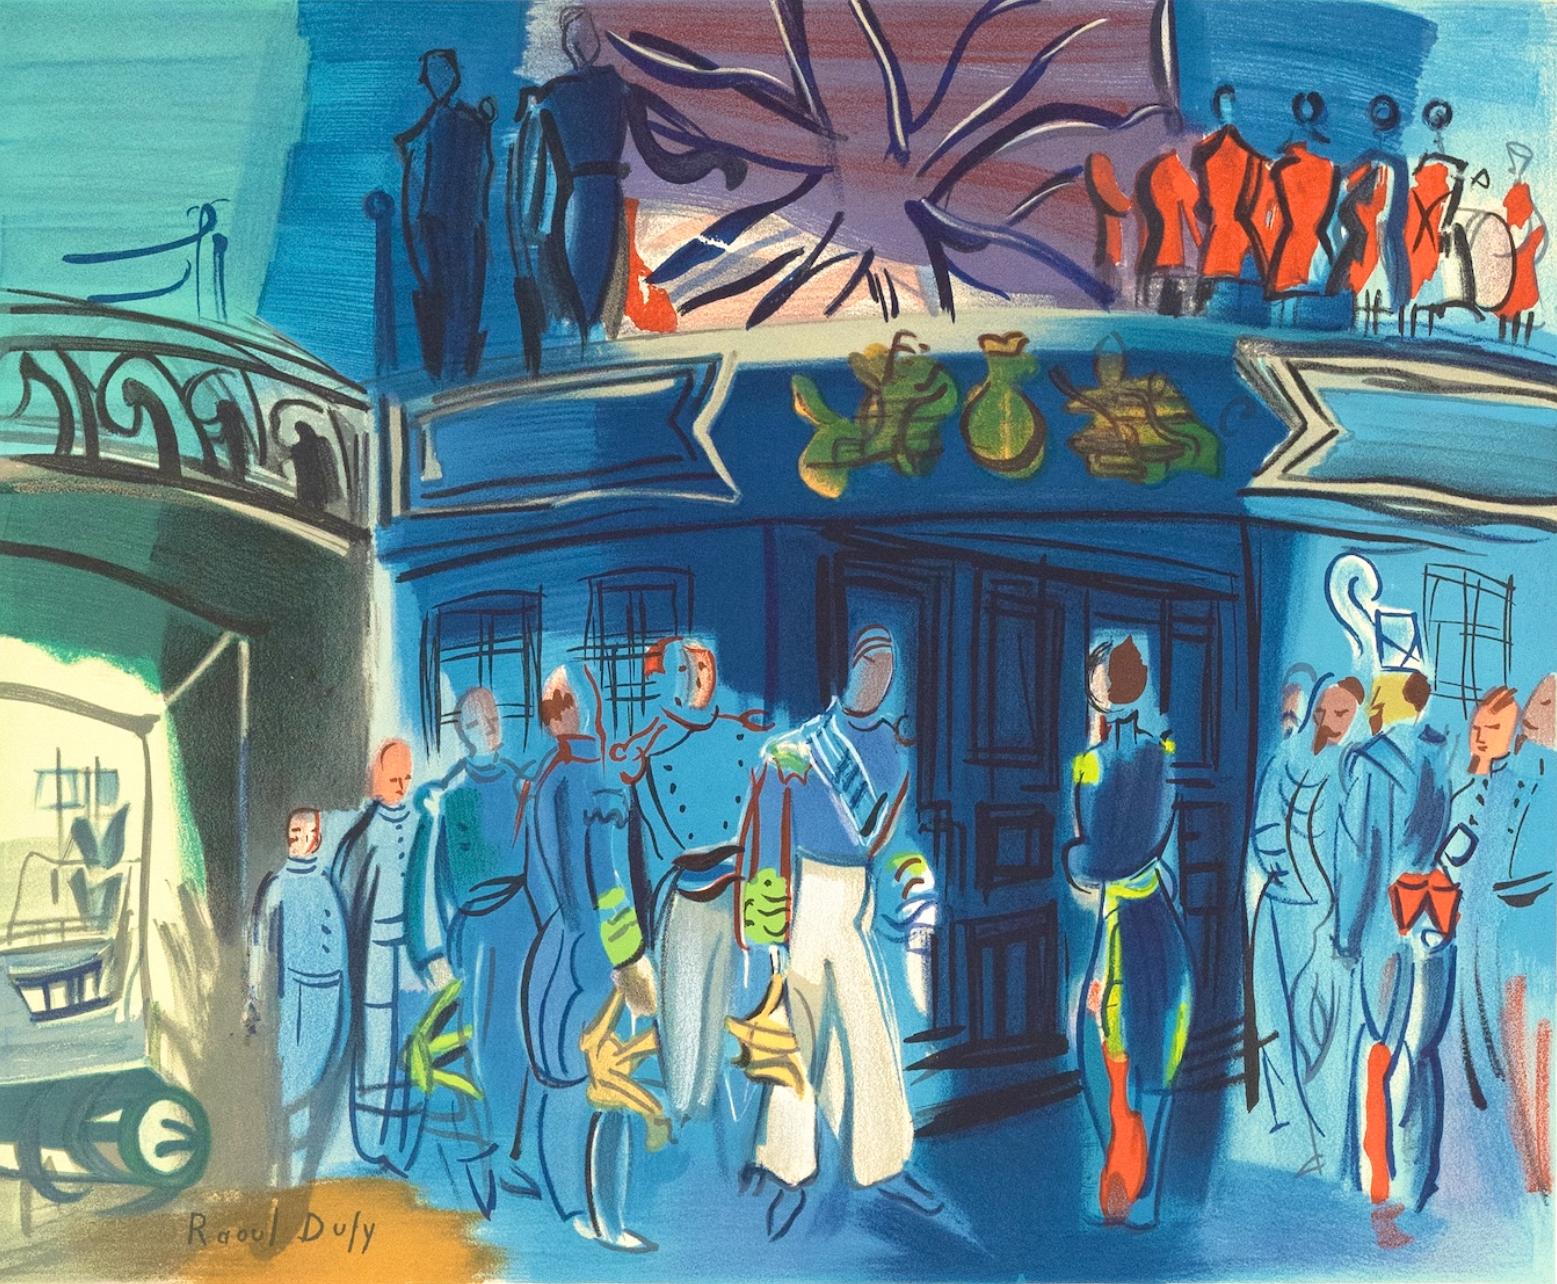 Lithograph on vélin d'Arches. Inscription: Unsigned and unnumbered. Good condition. Notes: From the folio, Raoul Dufy, IV, Collection Pierre Levy, 1969; published by Fernand Mourlot, Paris; printed by Mourlot Frères, Paris, November 4, 1969.